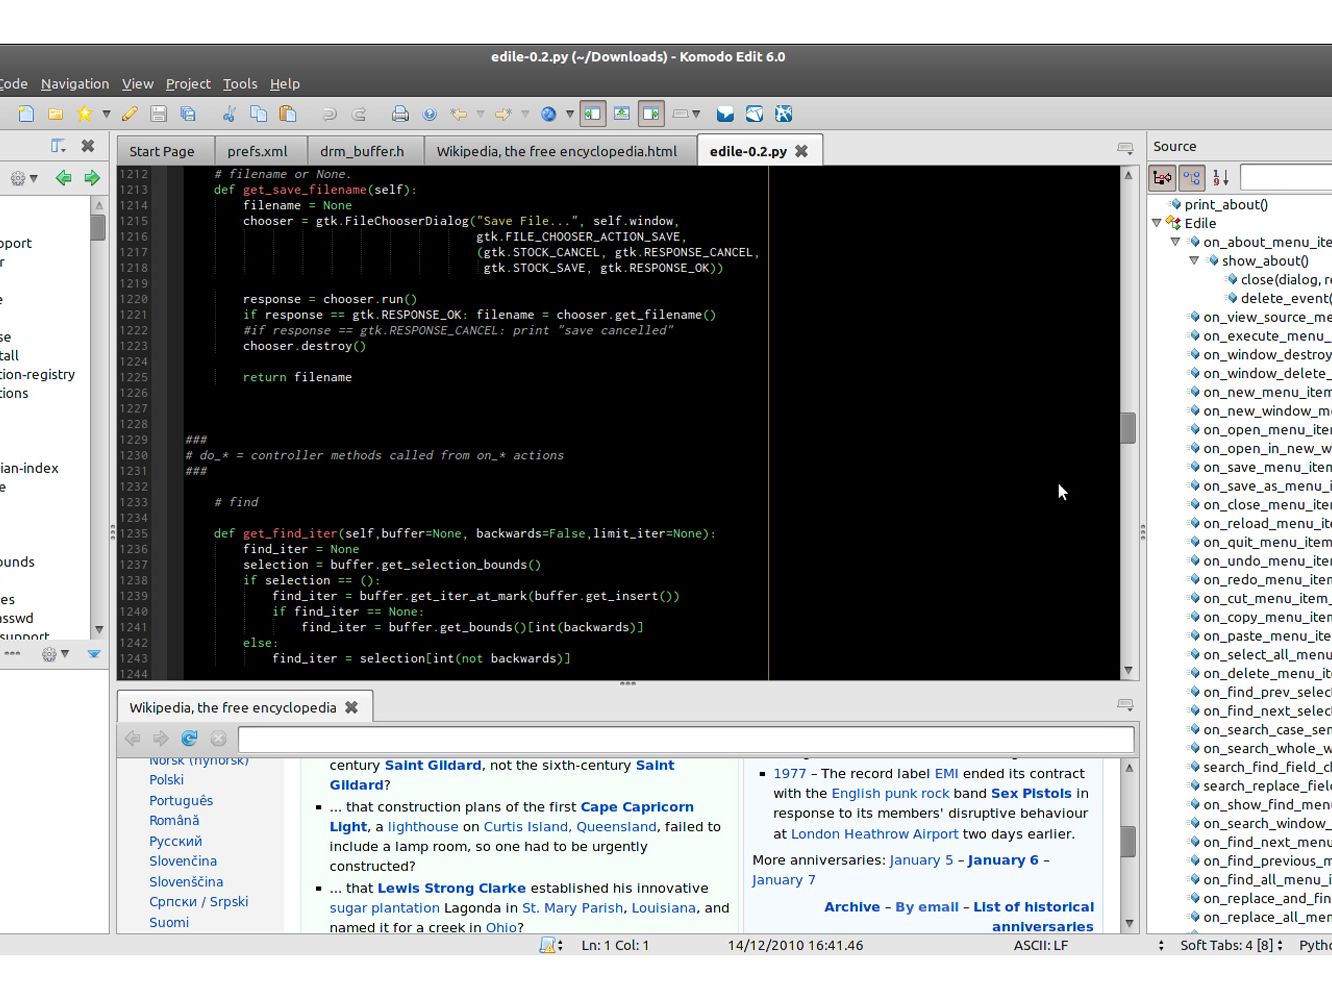 w3c (world wide web consortium)free editor available for download for mac